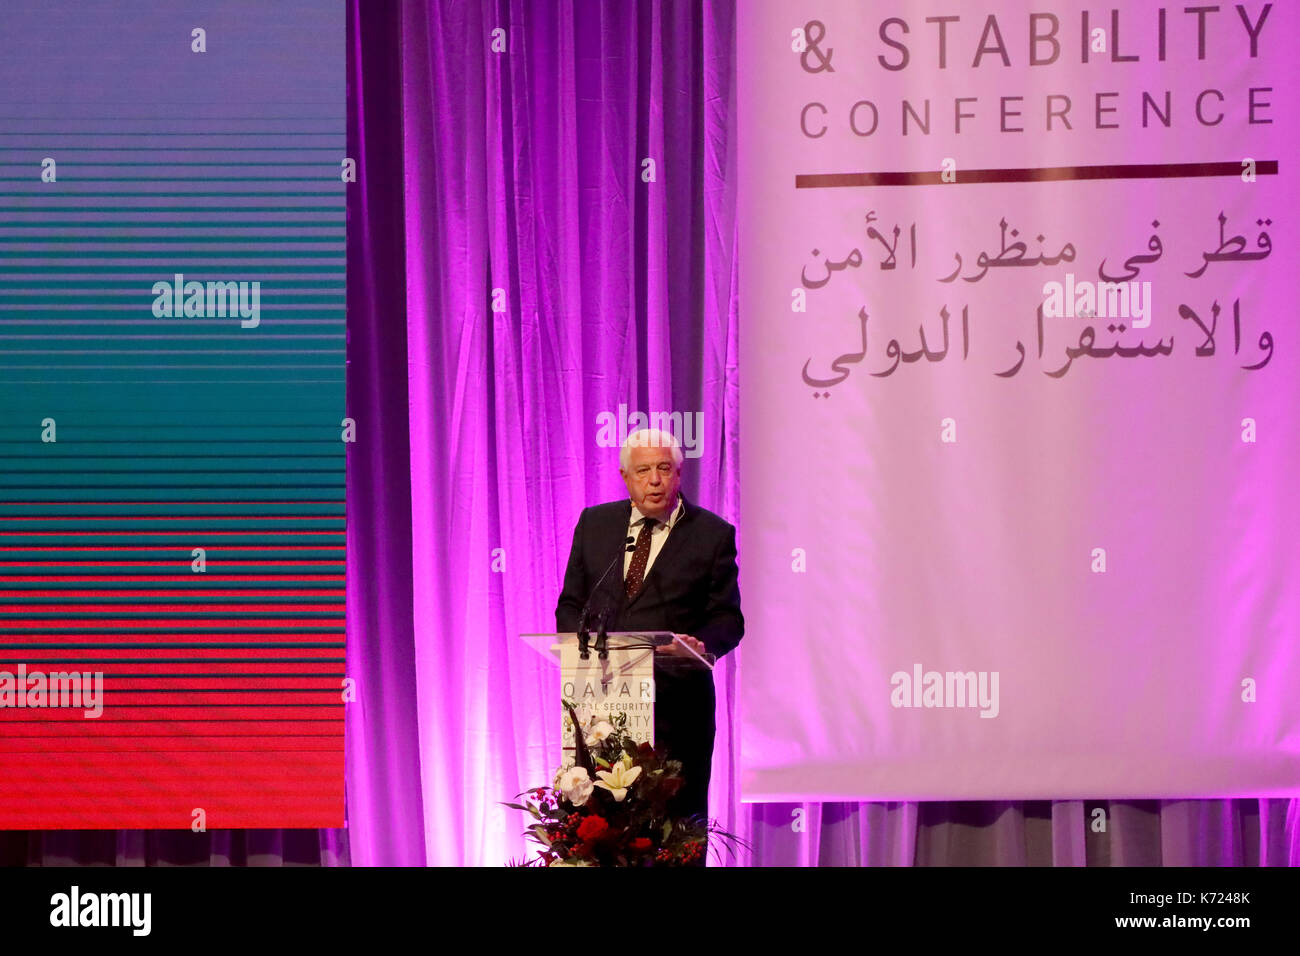 London, UK. 14th Sep, 2017. Veteran broadcaster John Simpson speaking at the Qatar Global Security & Stability Conference in London, where he was acting a moderator, on 14 September 2017. Credit: Dominic Dudley/Alamy Live News Stock Photo